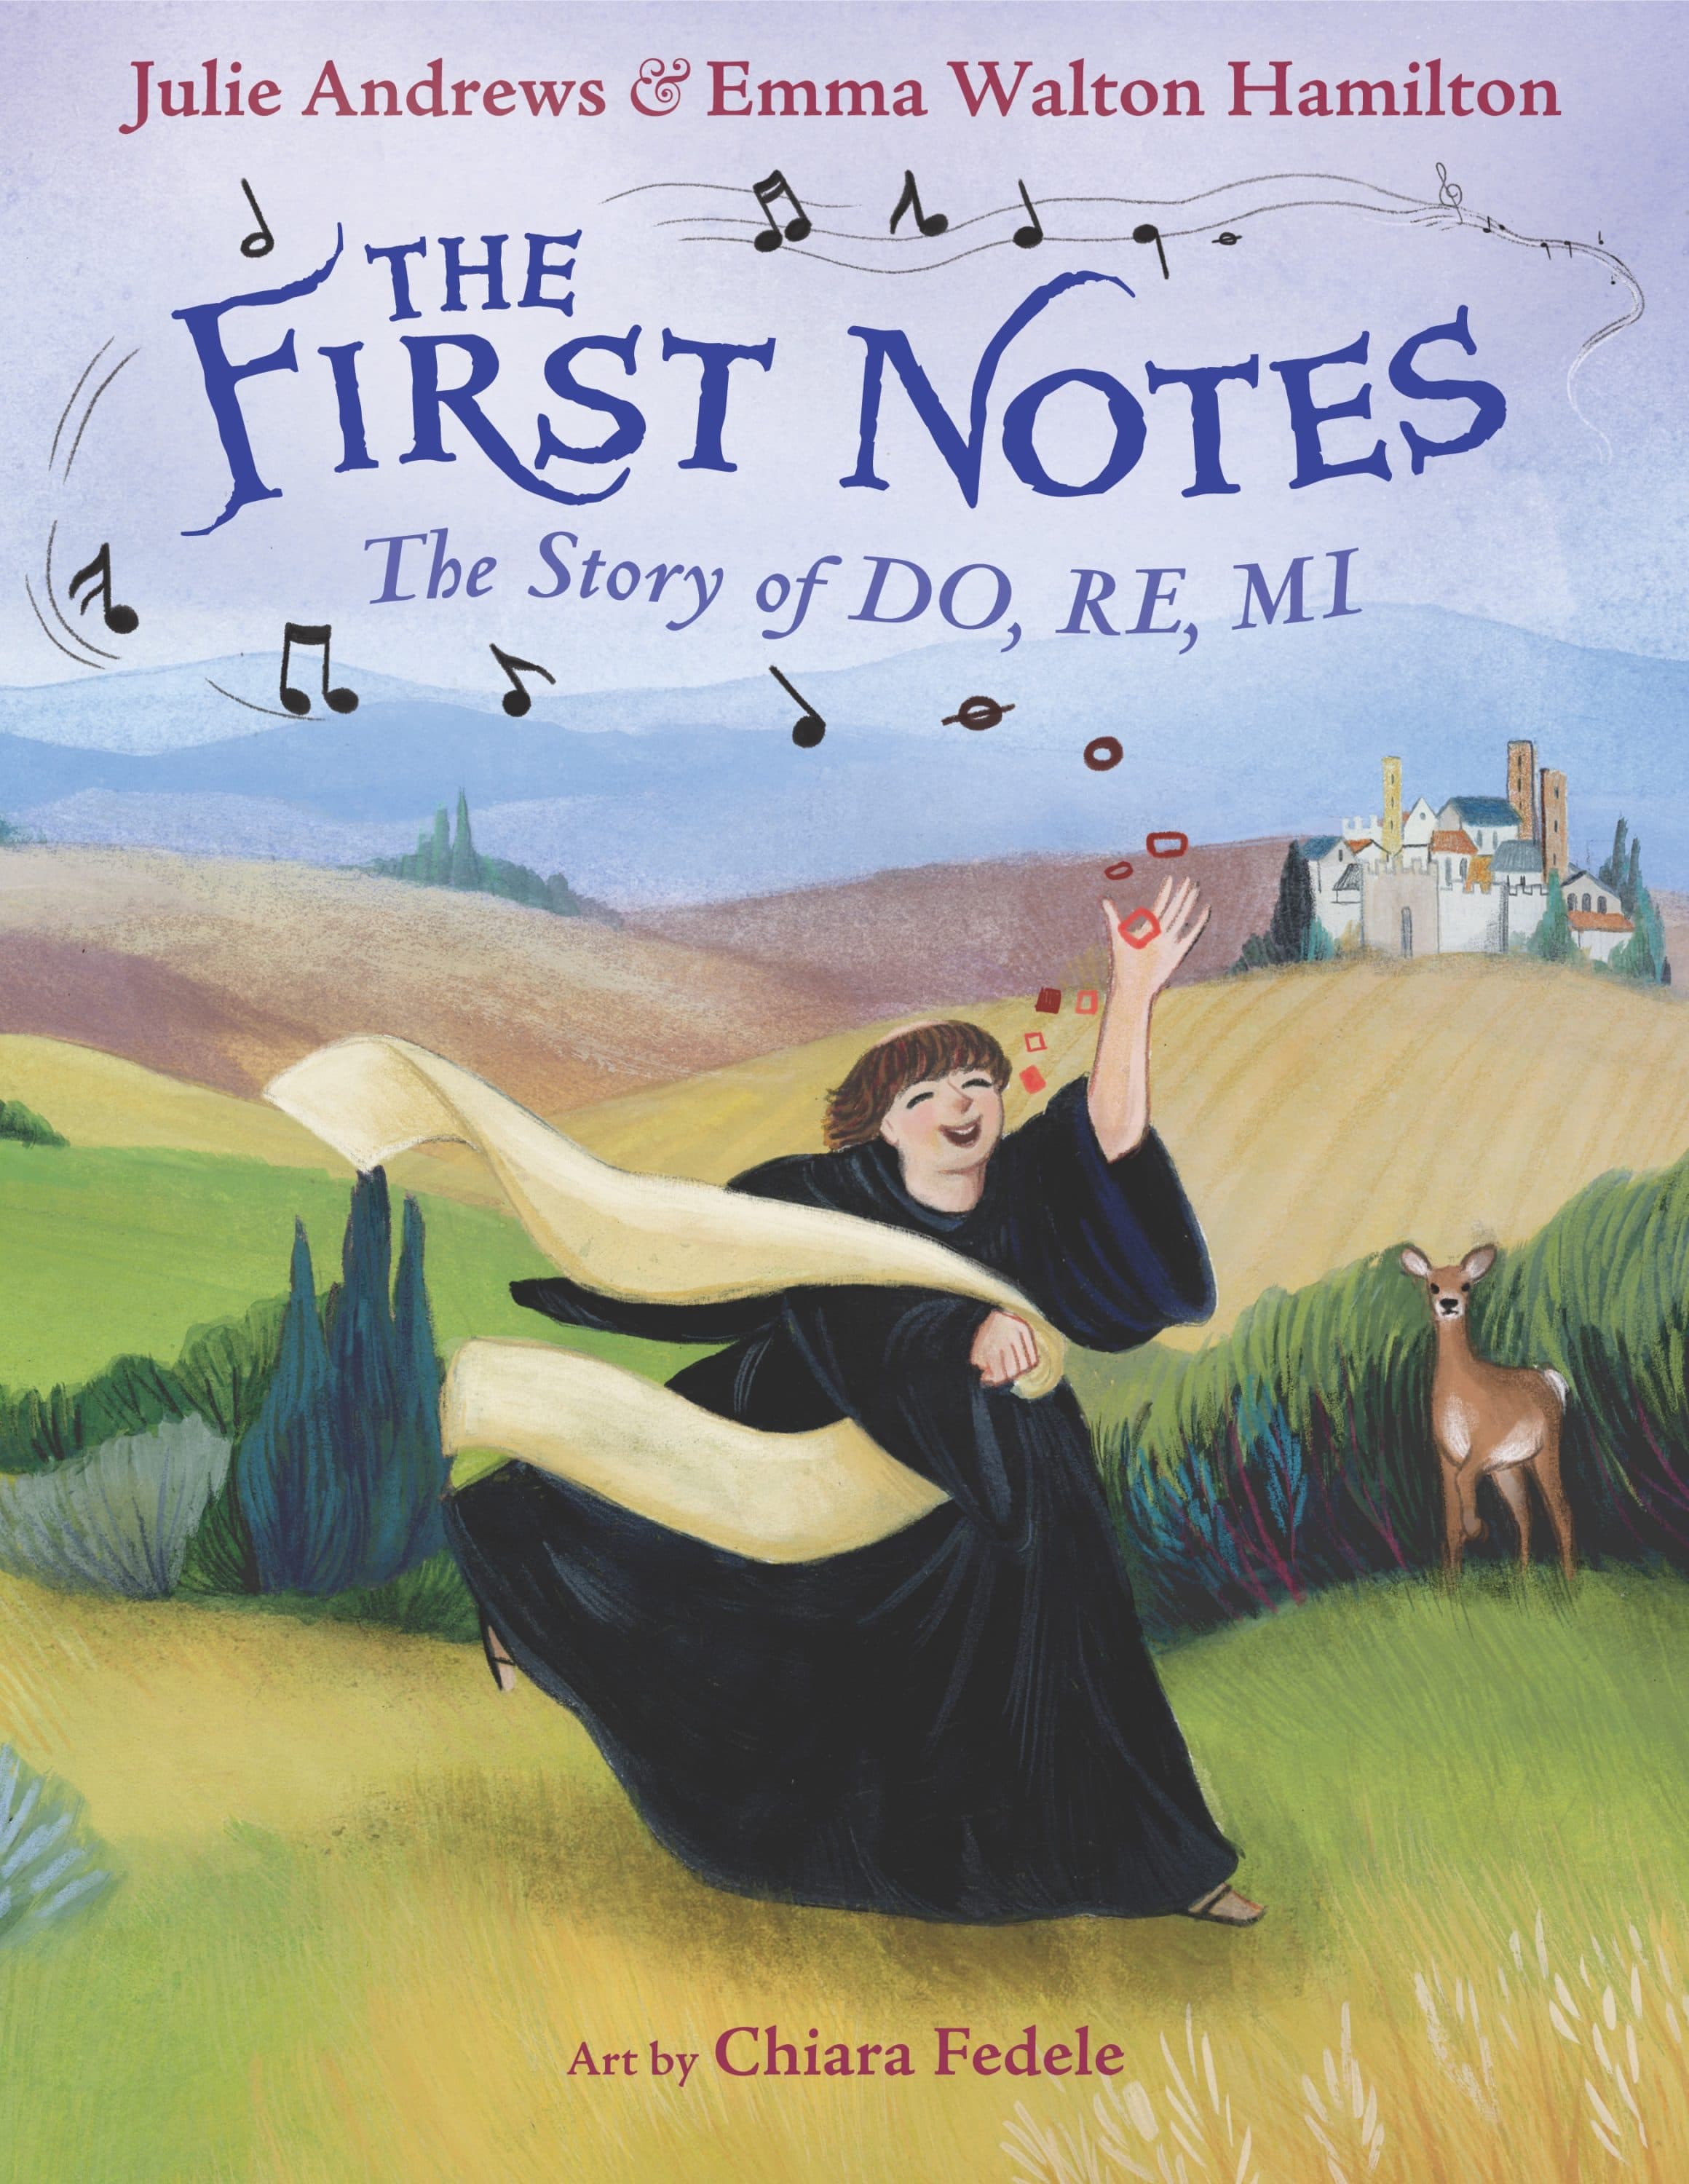 "The First Notes: The Story of Do, Re, Mi" cover. (Courtesy of Little, Brown and Company)